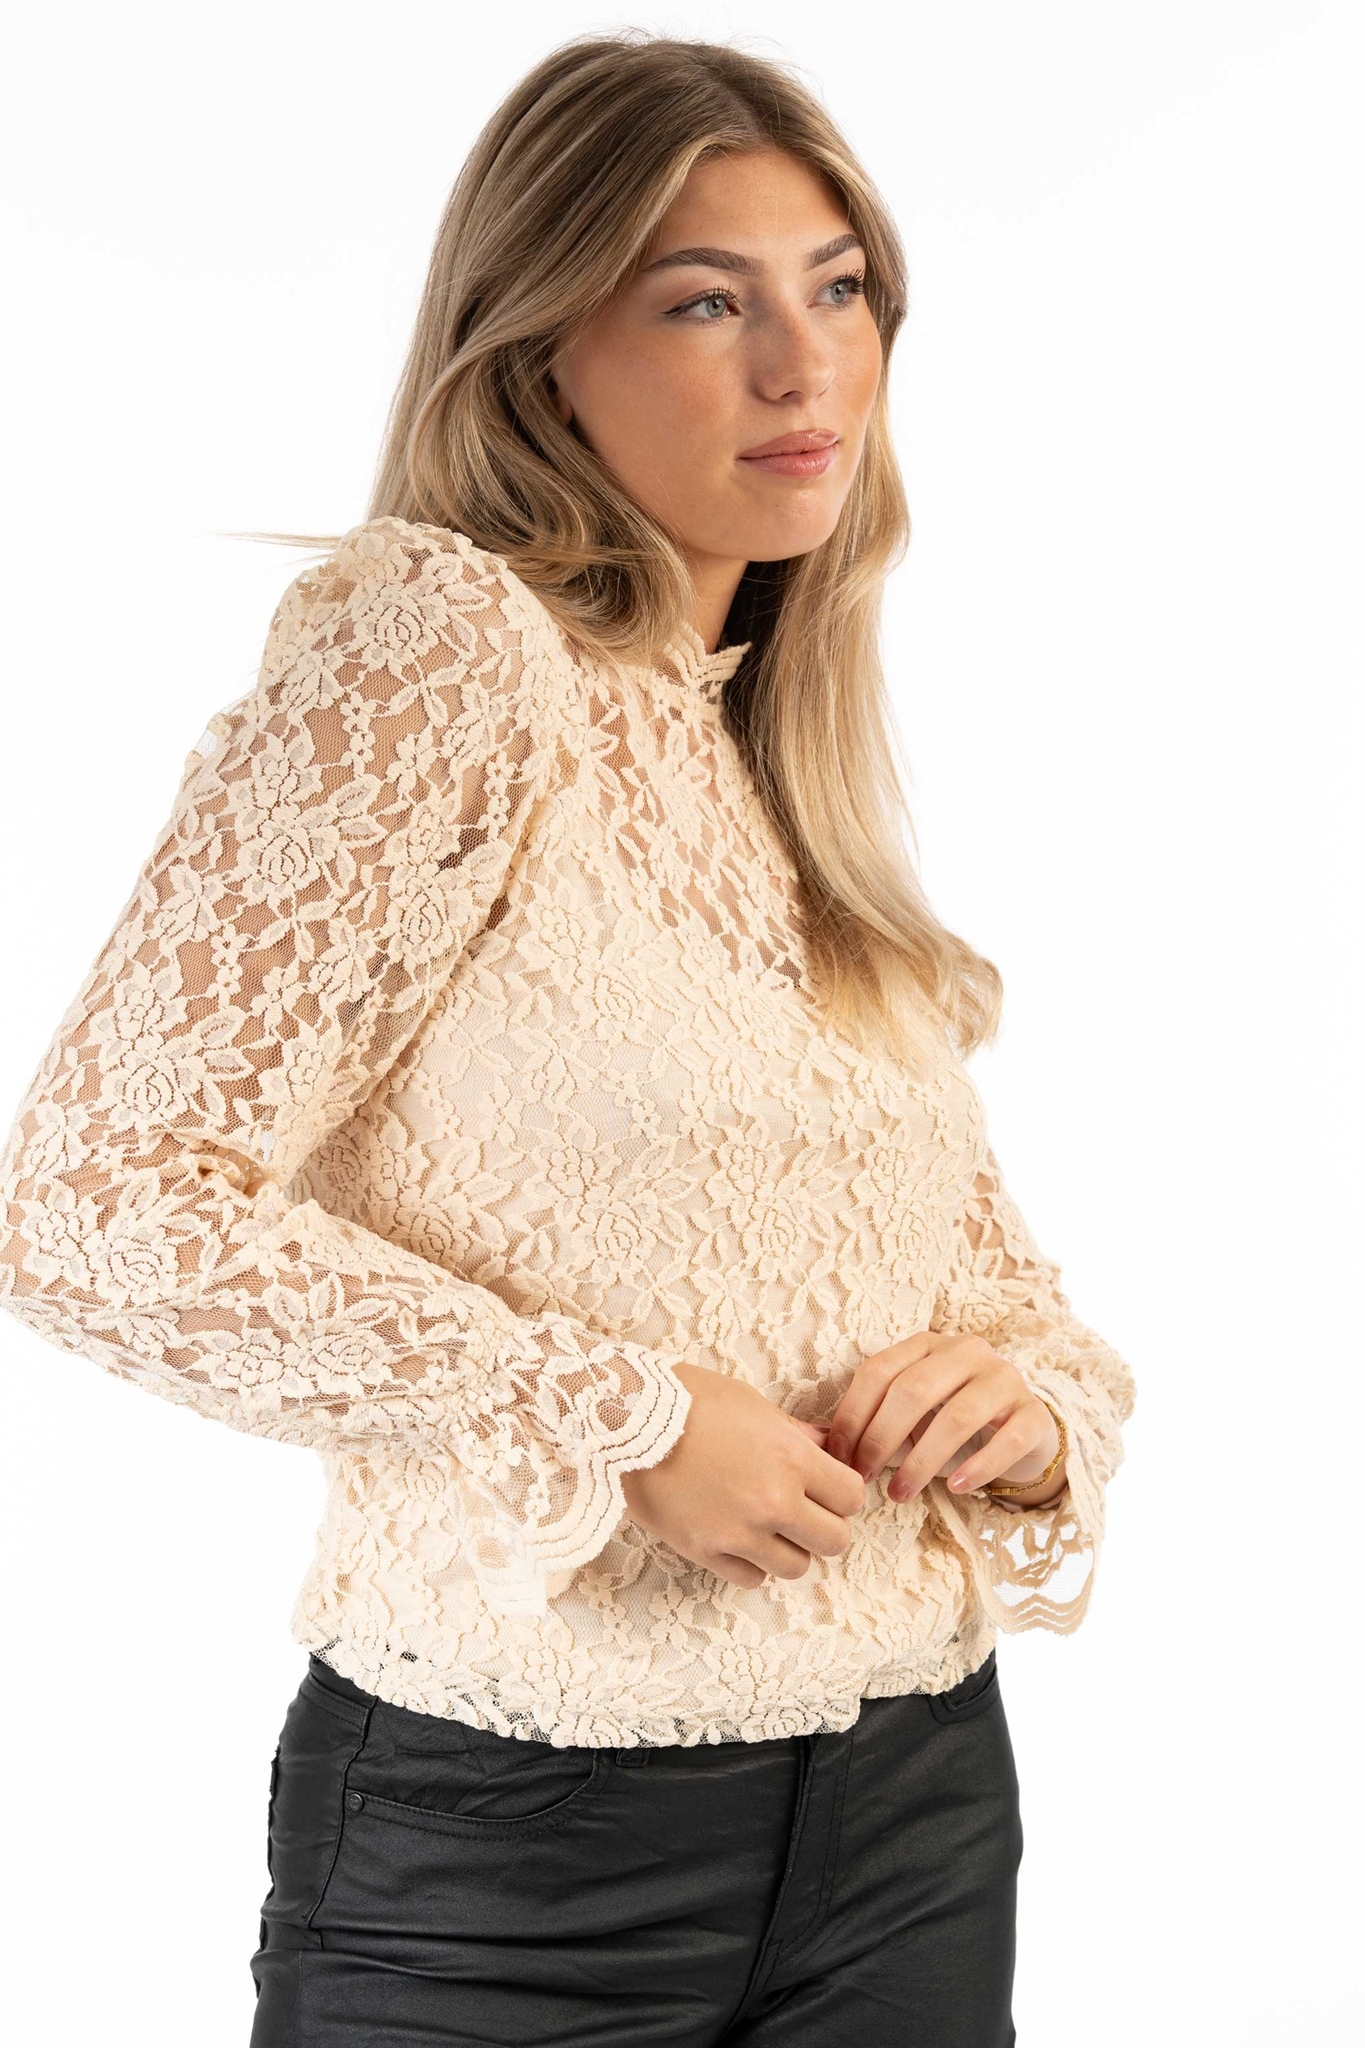 Adelaide Lace Top Champagne